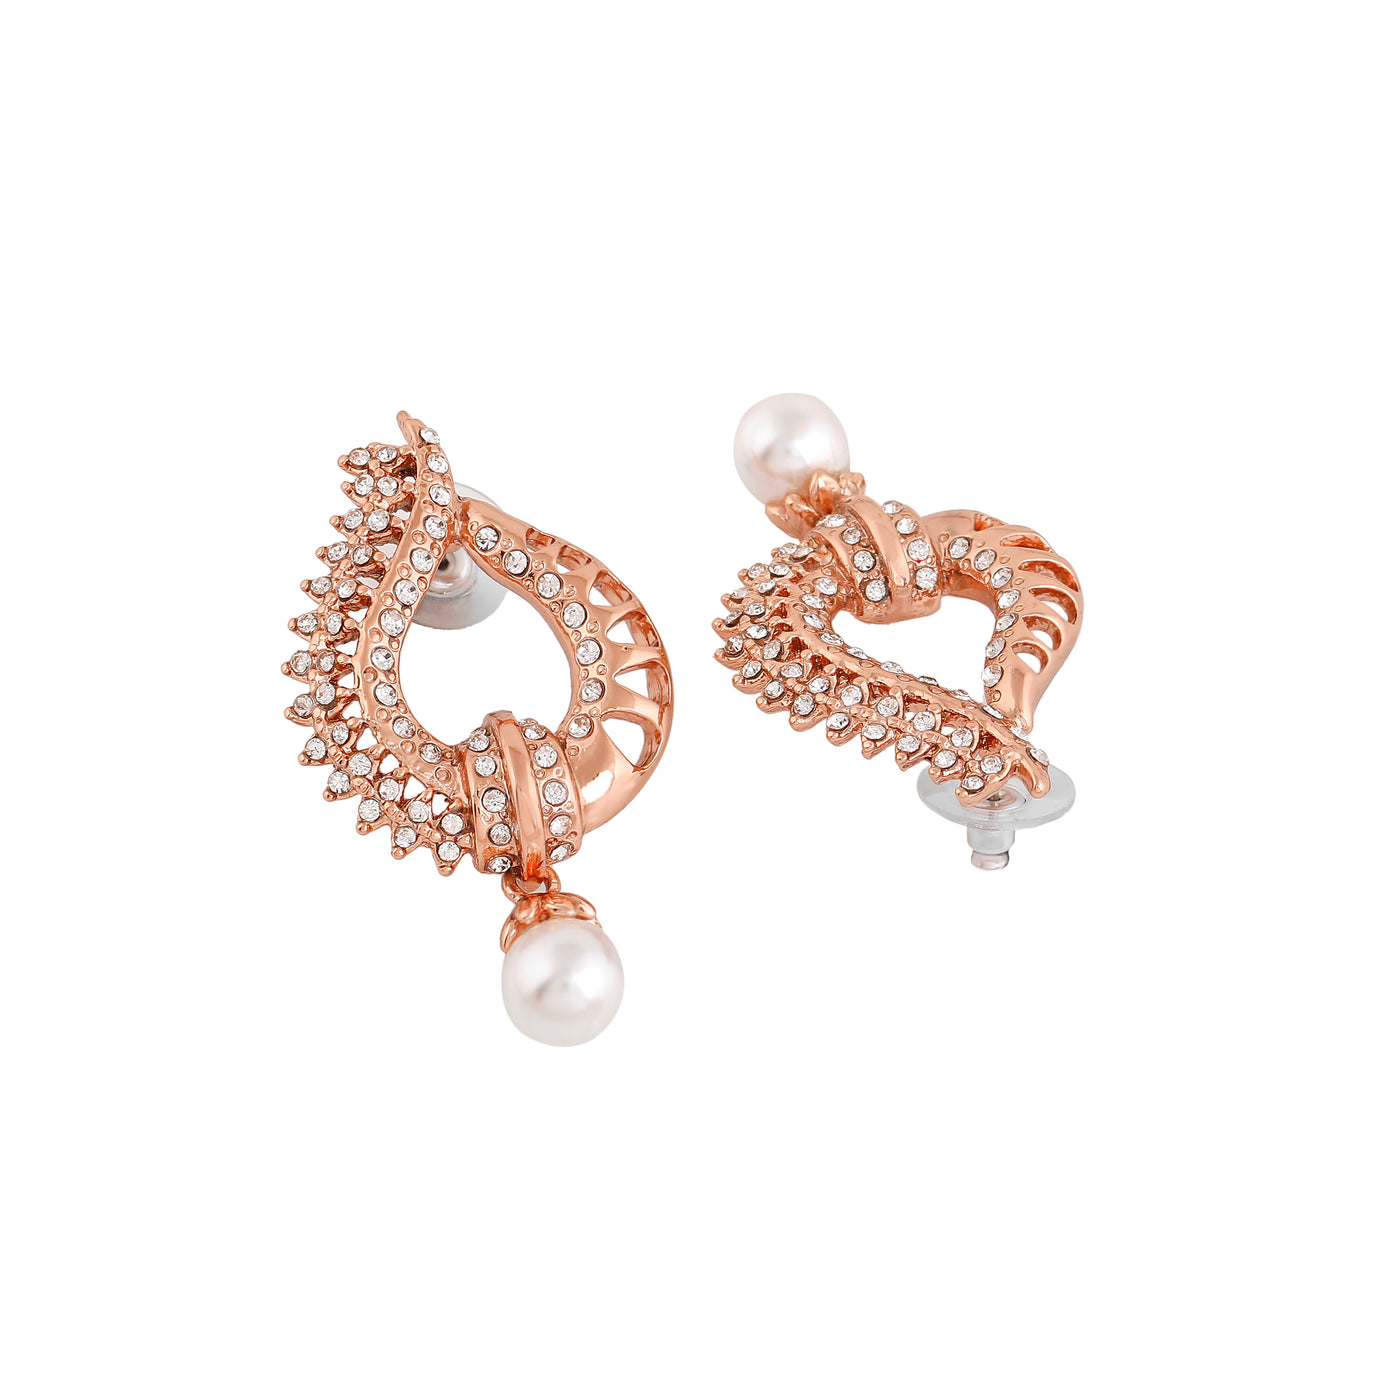 Estele Rose Gold Plated Heart Shaped Drop Earrings with Austrian Crystals for Women